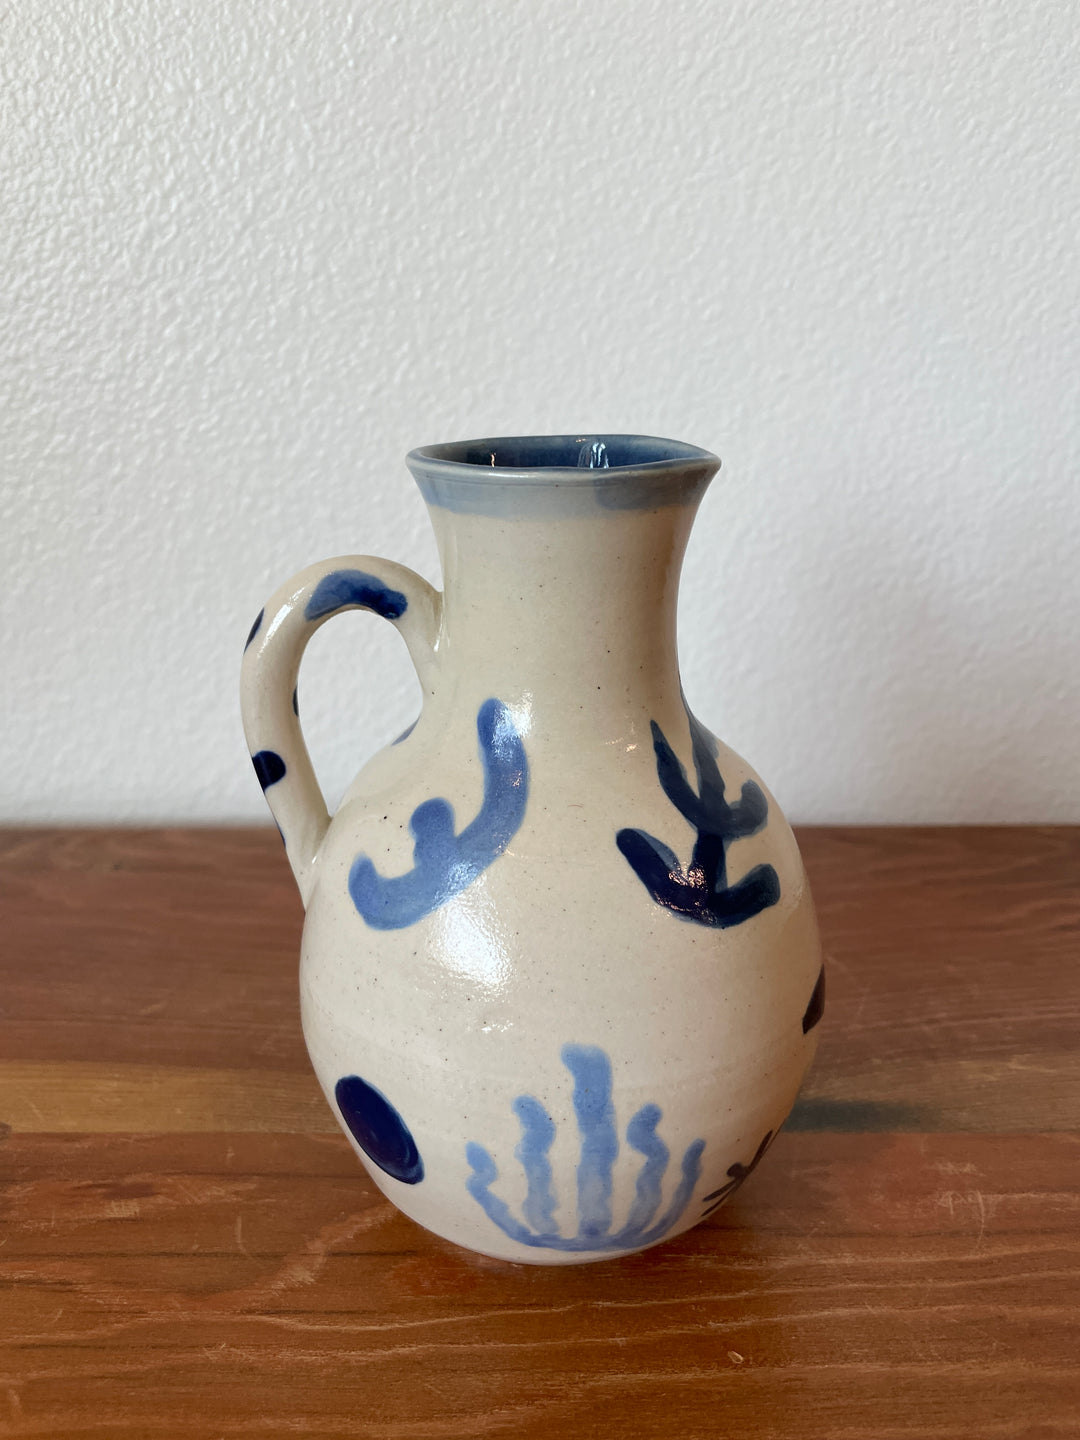 The Gia - Hand Painted Motif Pitcher (shades of blue)